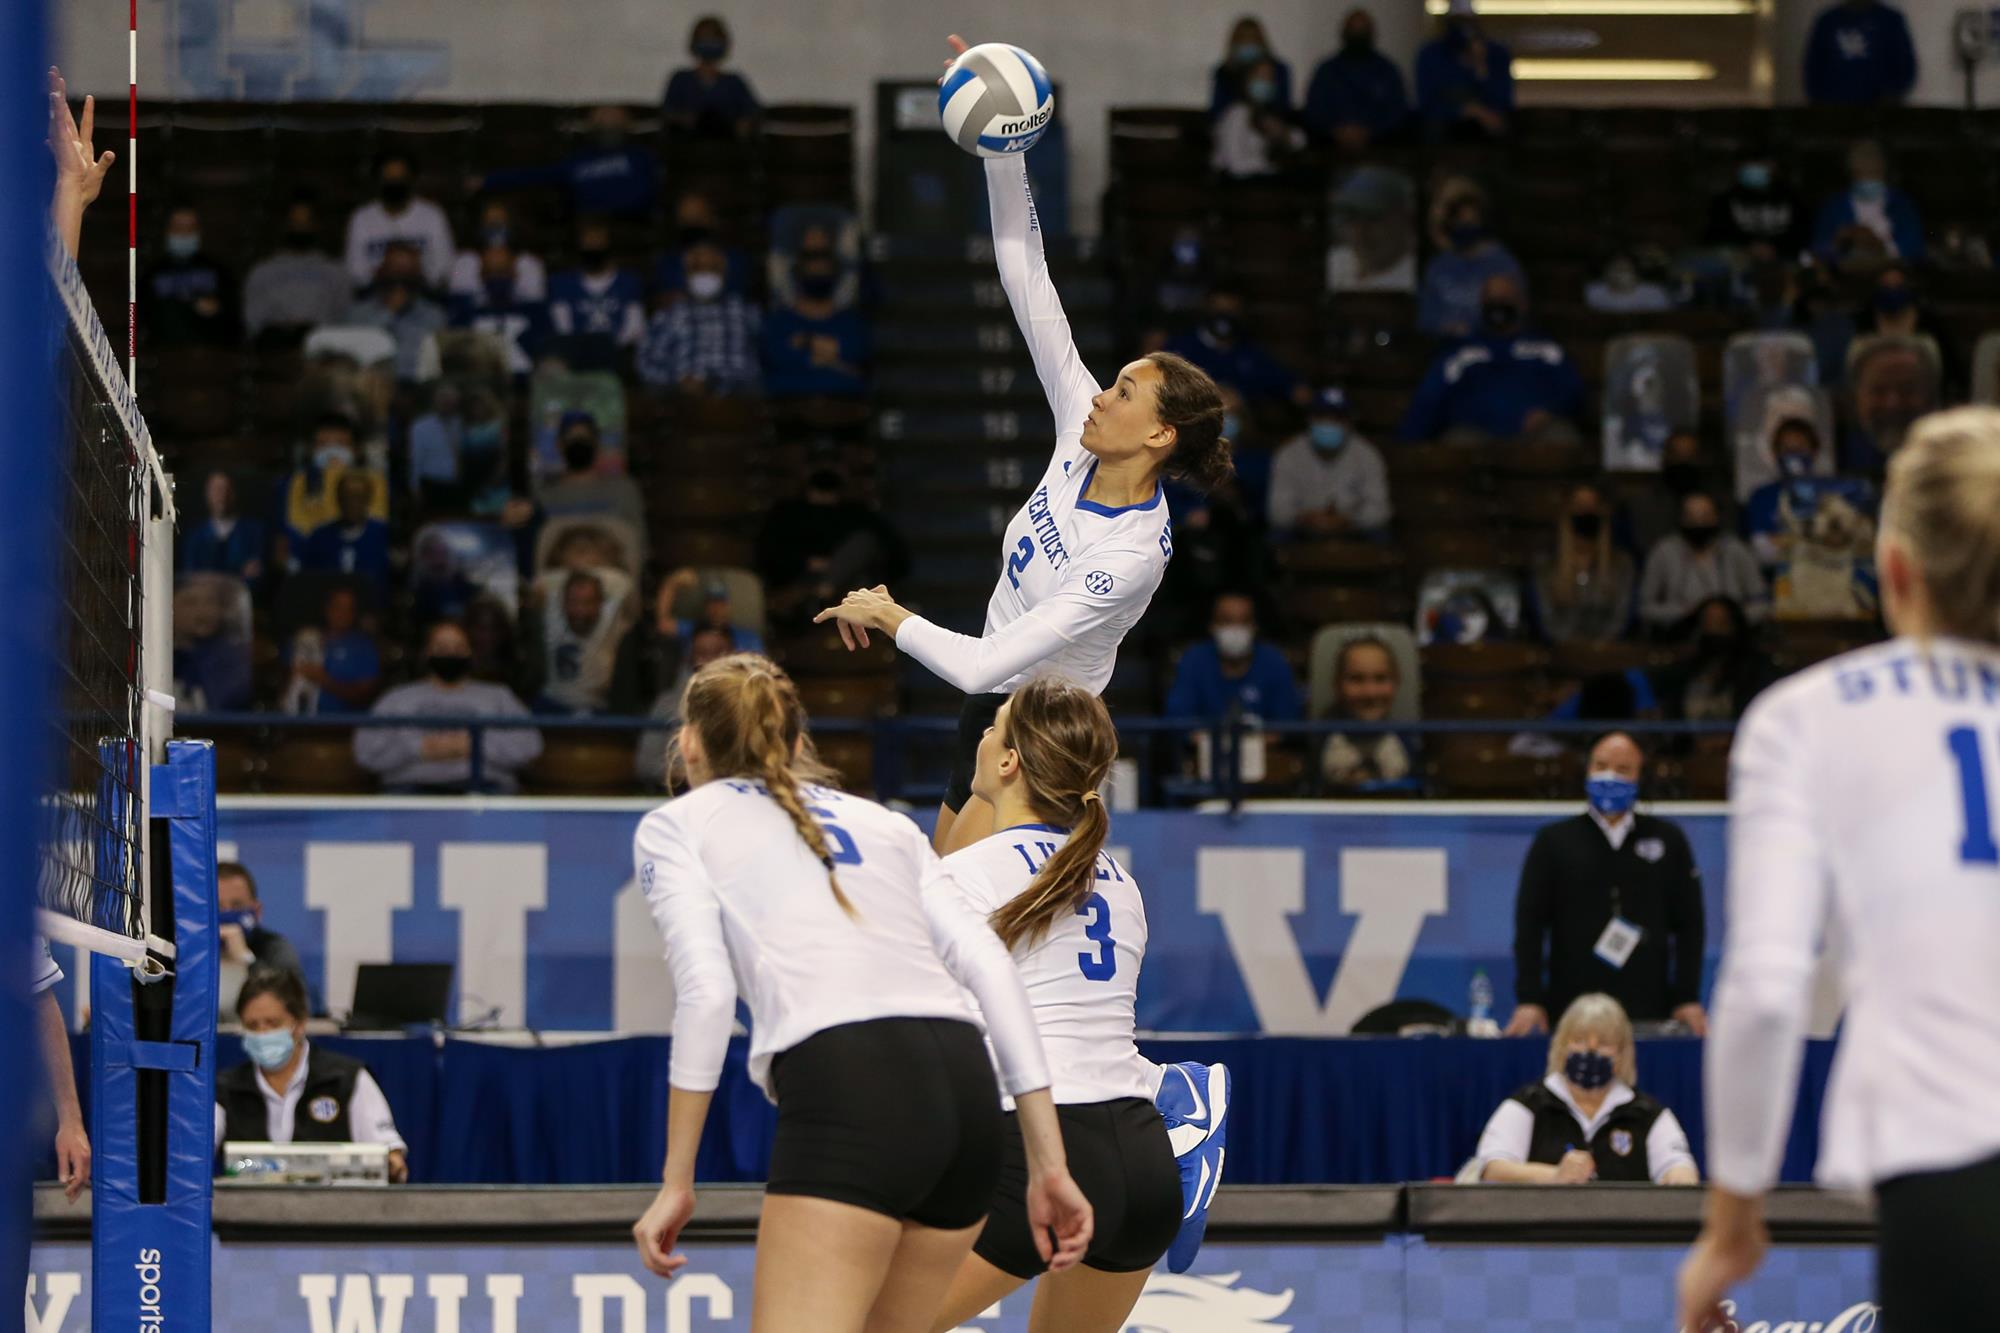 Stumler and M. Skinner Overpower Florida in Sweep of Gators